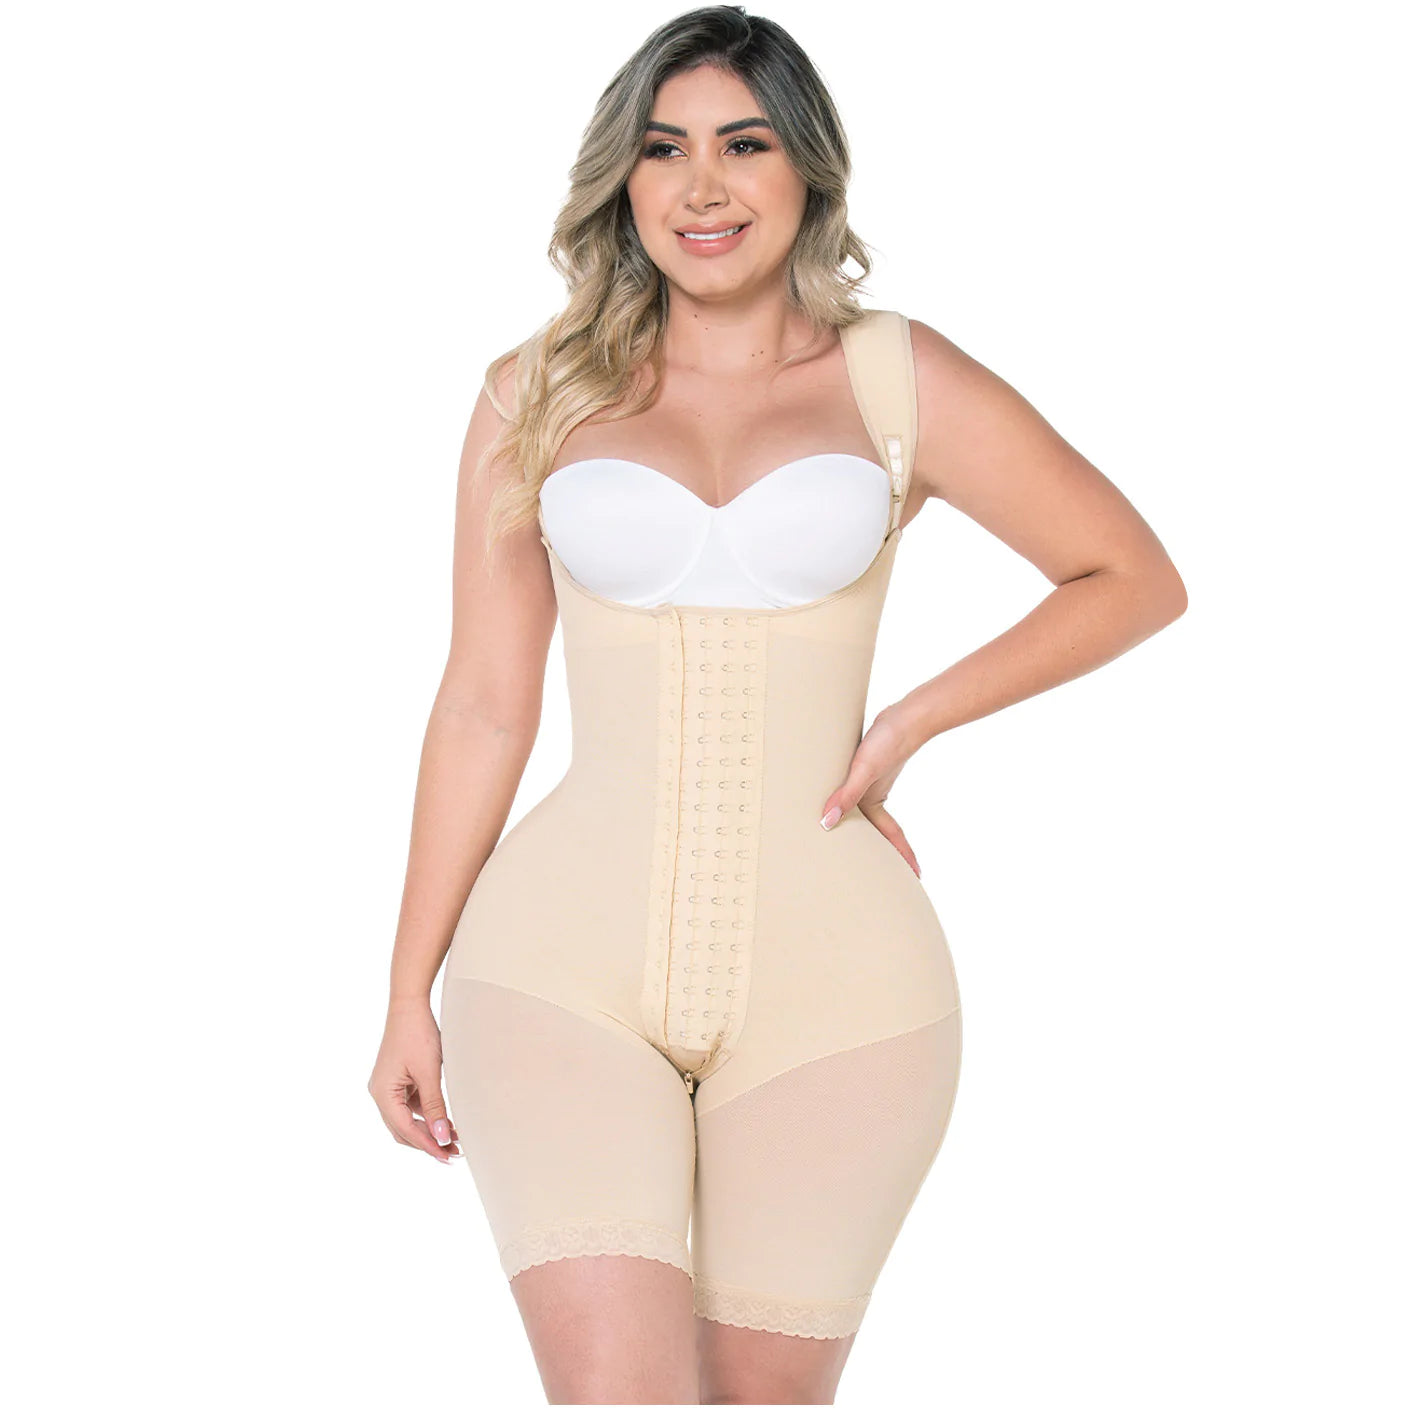 Fajas MYD F00489 | Fajas Colombianas Post Surgery Mid Thigh Shapewear  Bodysuit for Guitar and Hourglass Body Types - Beige / 2XS